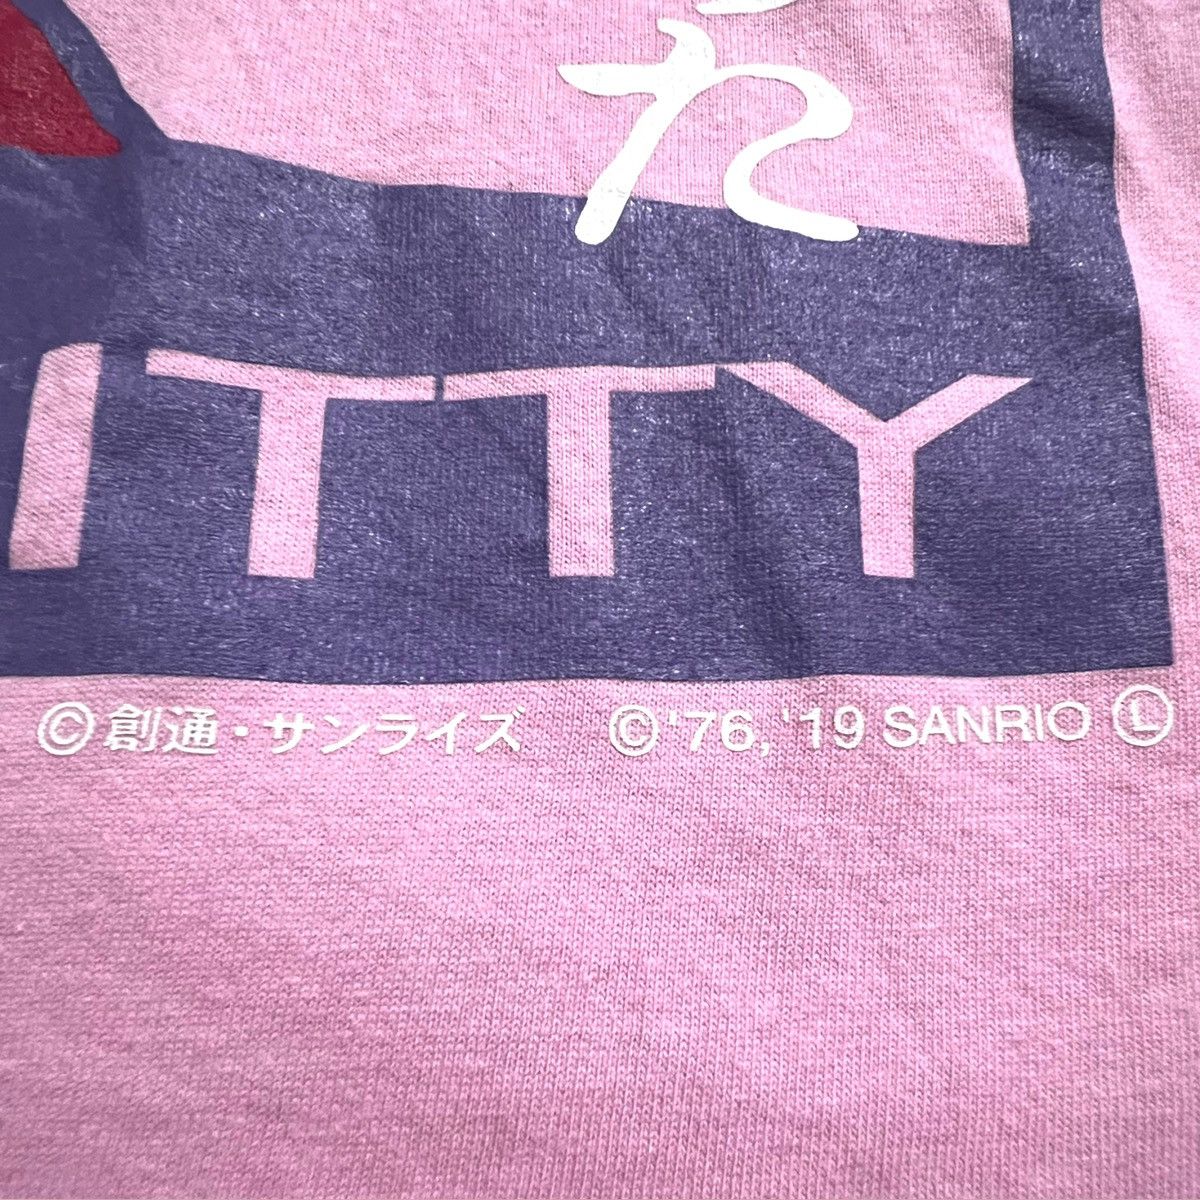 Japanese Brand LIMITED EDITION 2019 GUNDAM X HELLO KITTY PINK TEE IN PINK Size US M / EU 48-50 / 2 - 3 Thumbnail